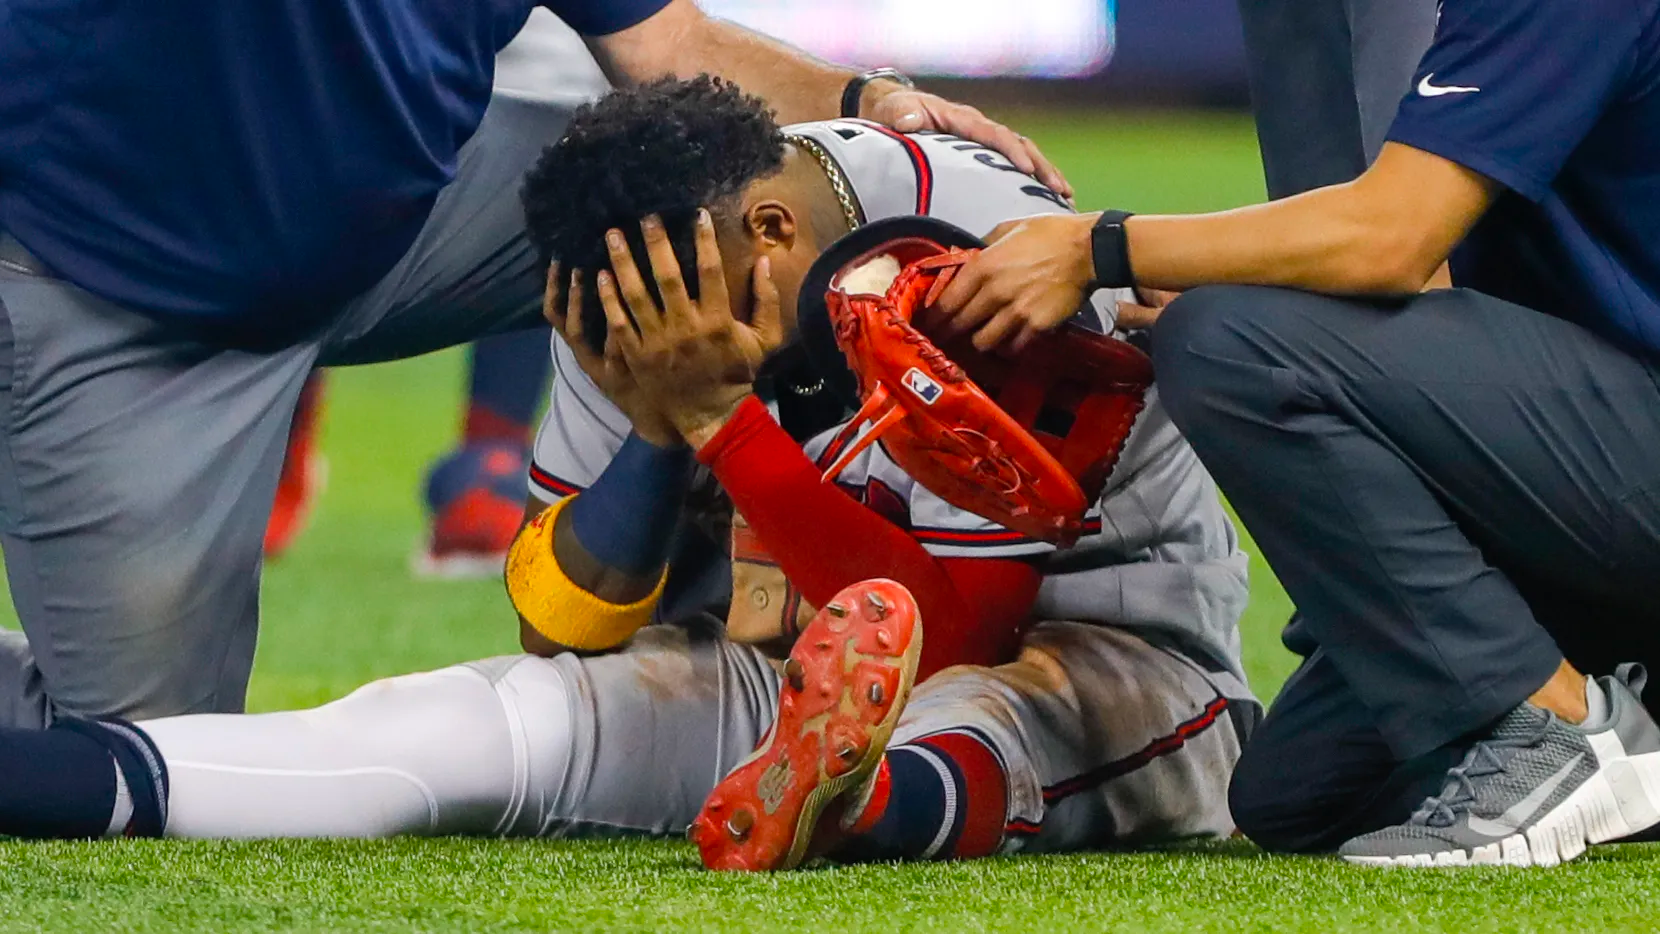 Ronald Acuña in the floor of the game field - 2021